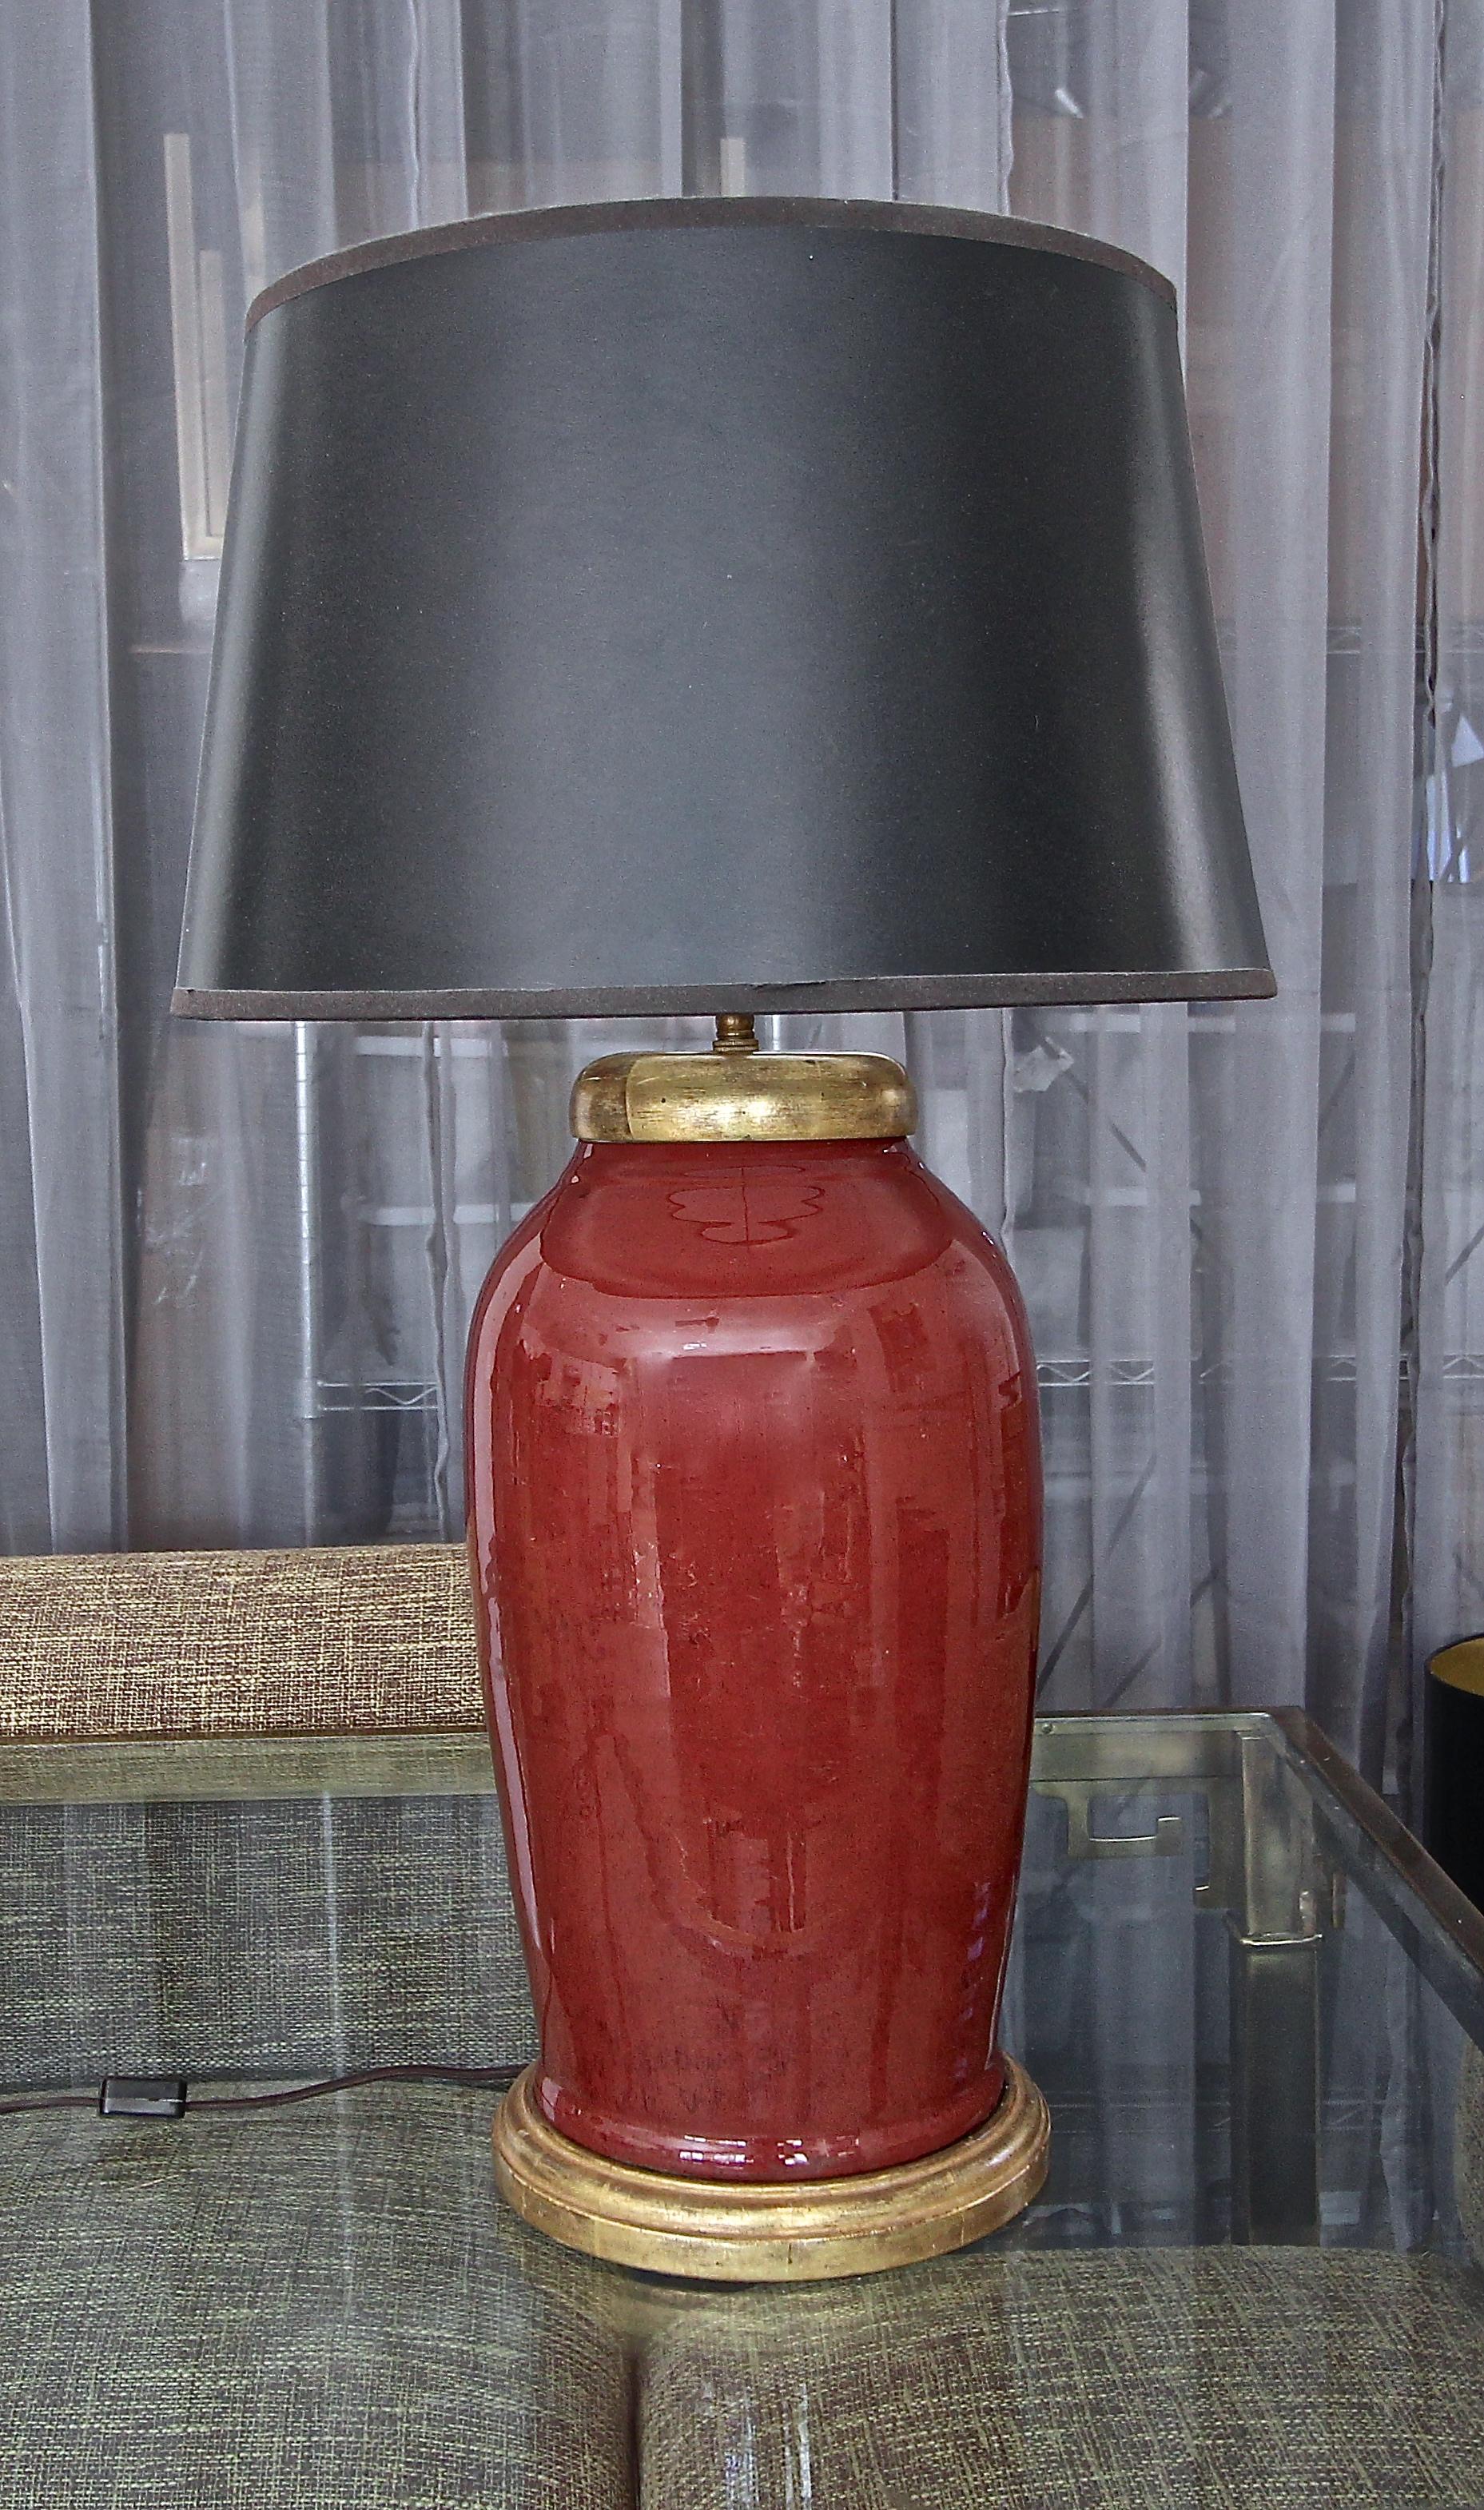 Large single) oxblood (red) porcelain vase table lamp, mounted on 23-karat water giltwood base. Interior vase cap is also turned wood in a 23-karat gilt finish. Antiqued finish hardware includes double sockets with on/off pull chains, adjustable